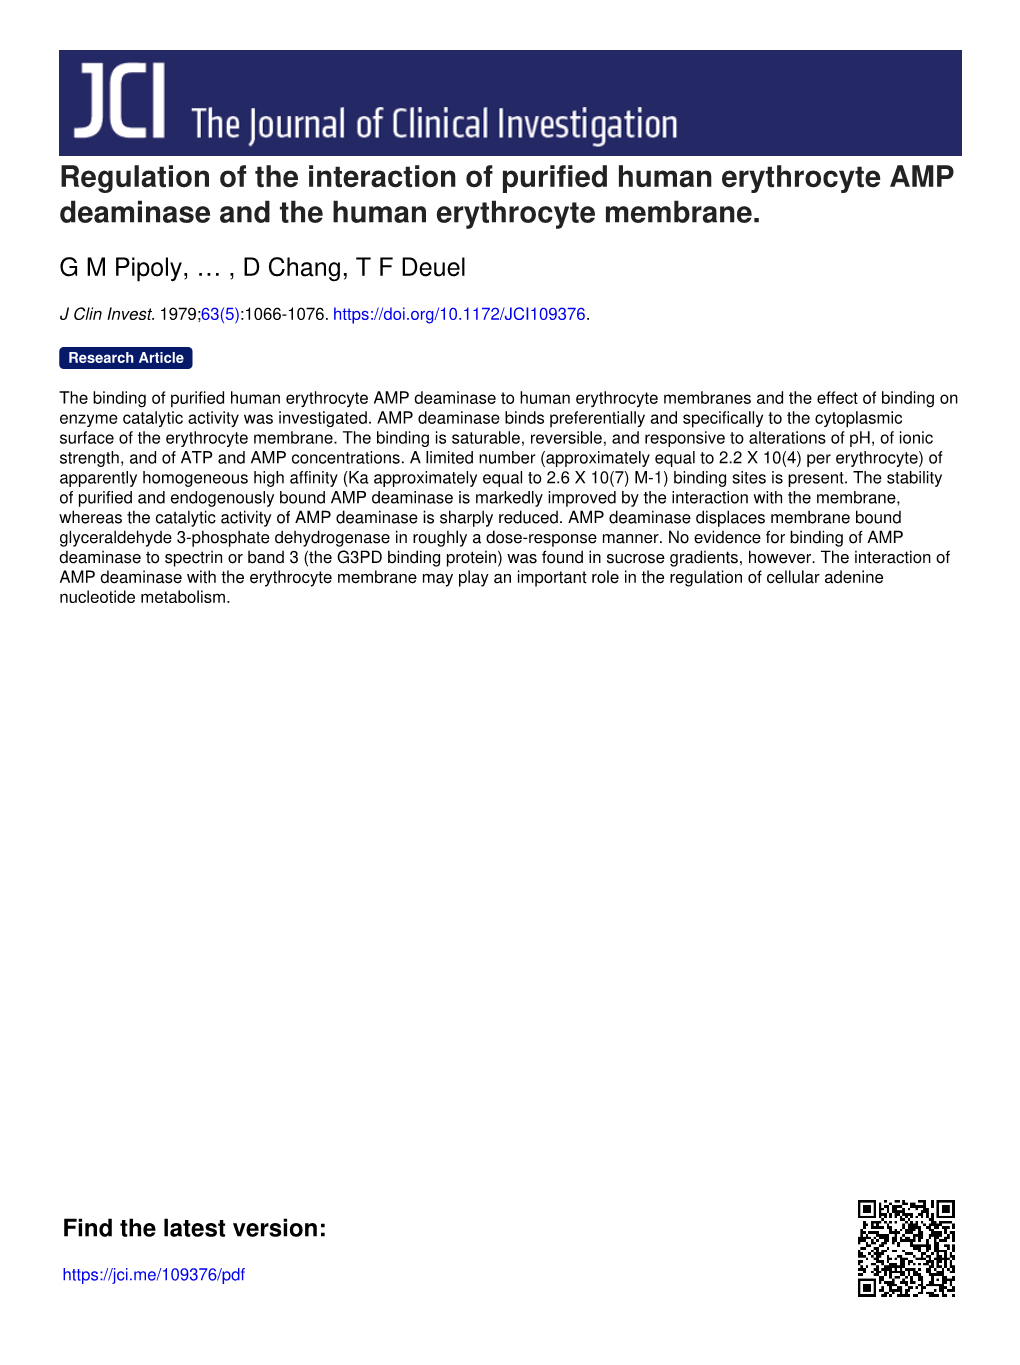 Regulation of the Interaction of Purified Human Erythrocyte AMP Deaminase and the Human Erythrocyte Membrane